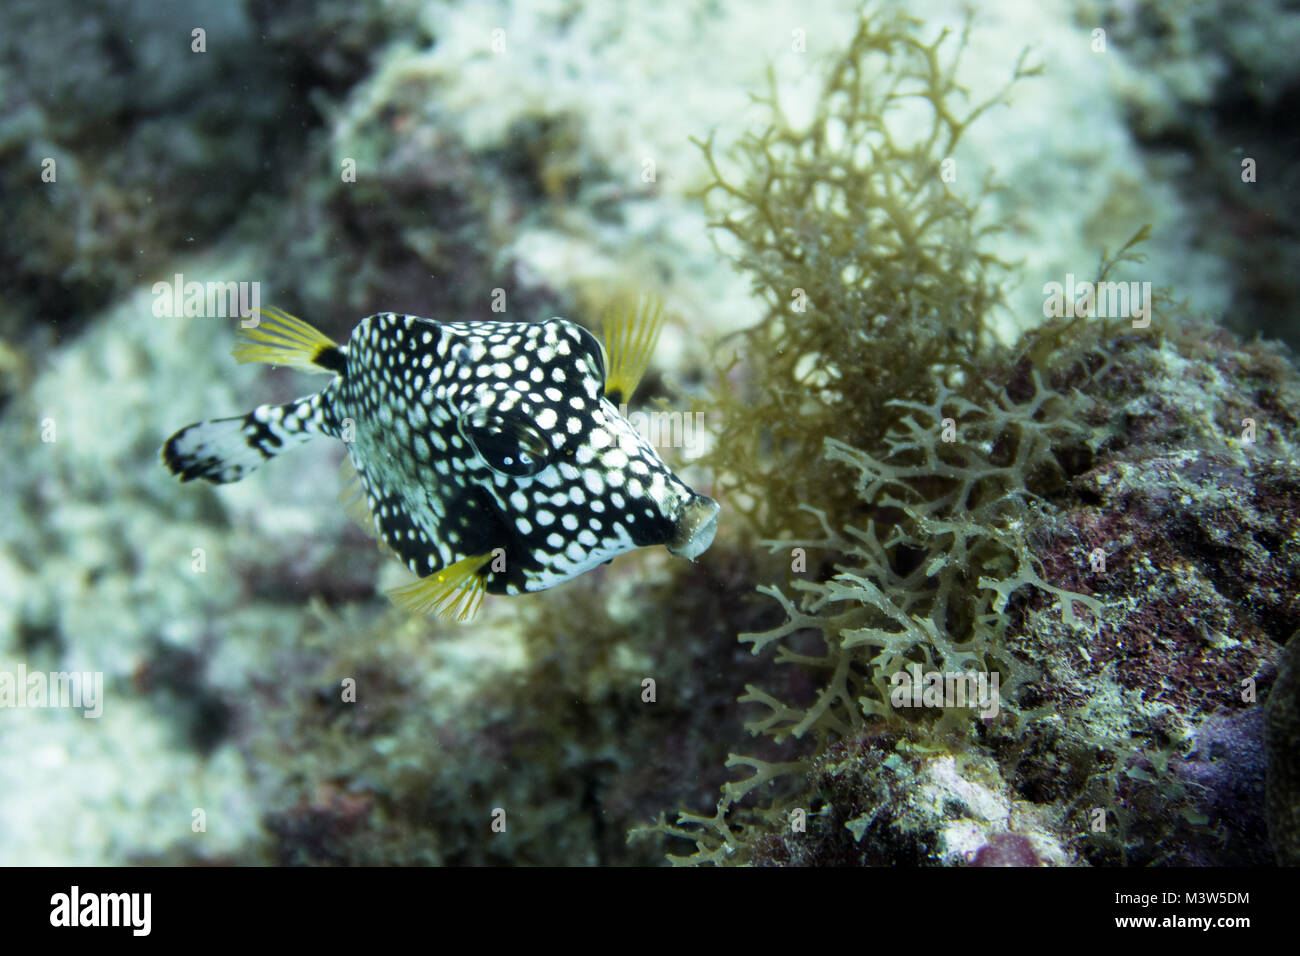 Lactophrys triqueter also known as the smooth trunkfish, is a species of boxfish found on and near reefs in the Caribbean Sea, Gulf of Mexico and subt Stock Photo